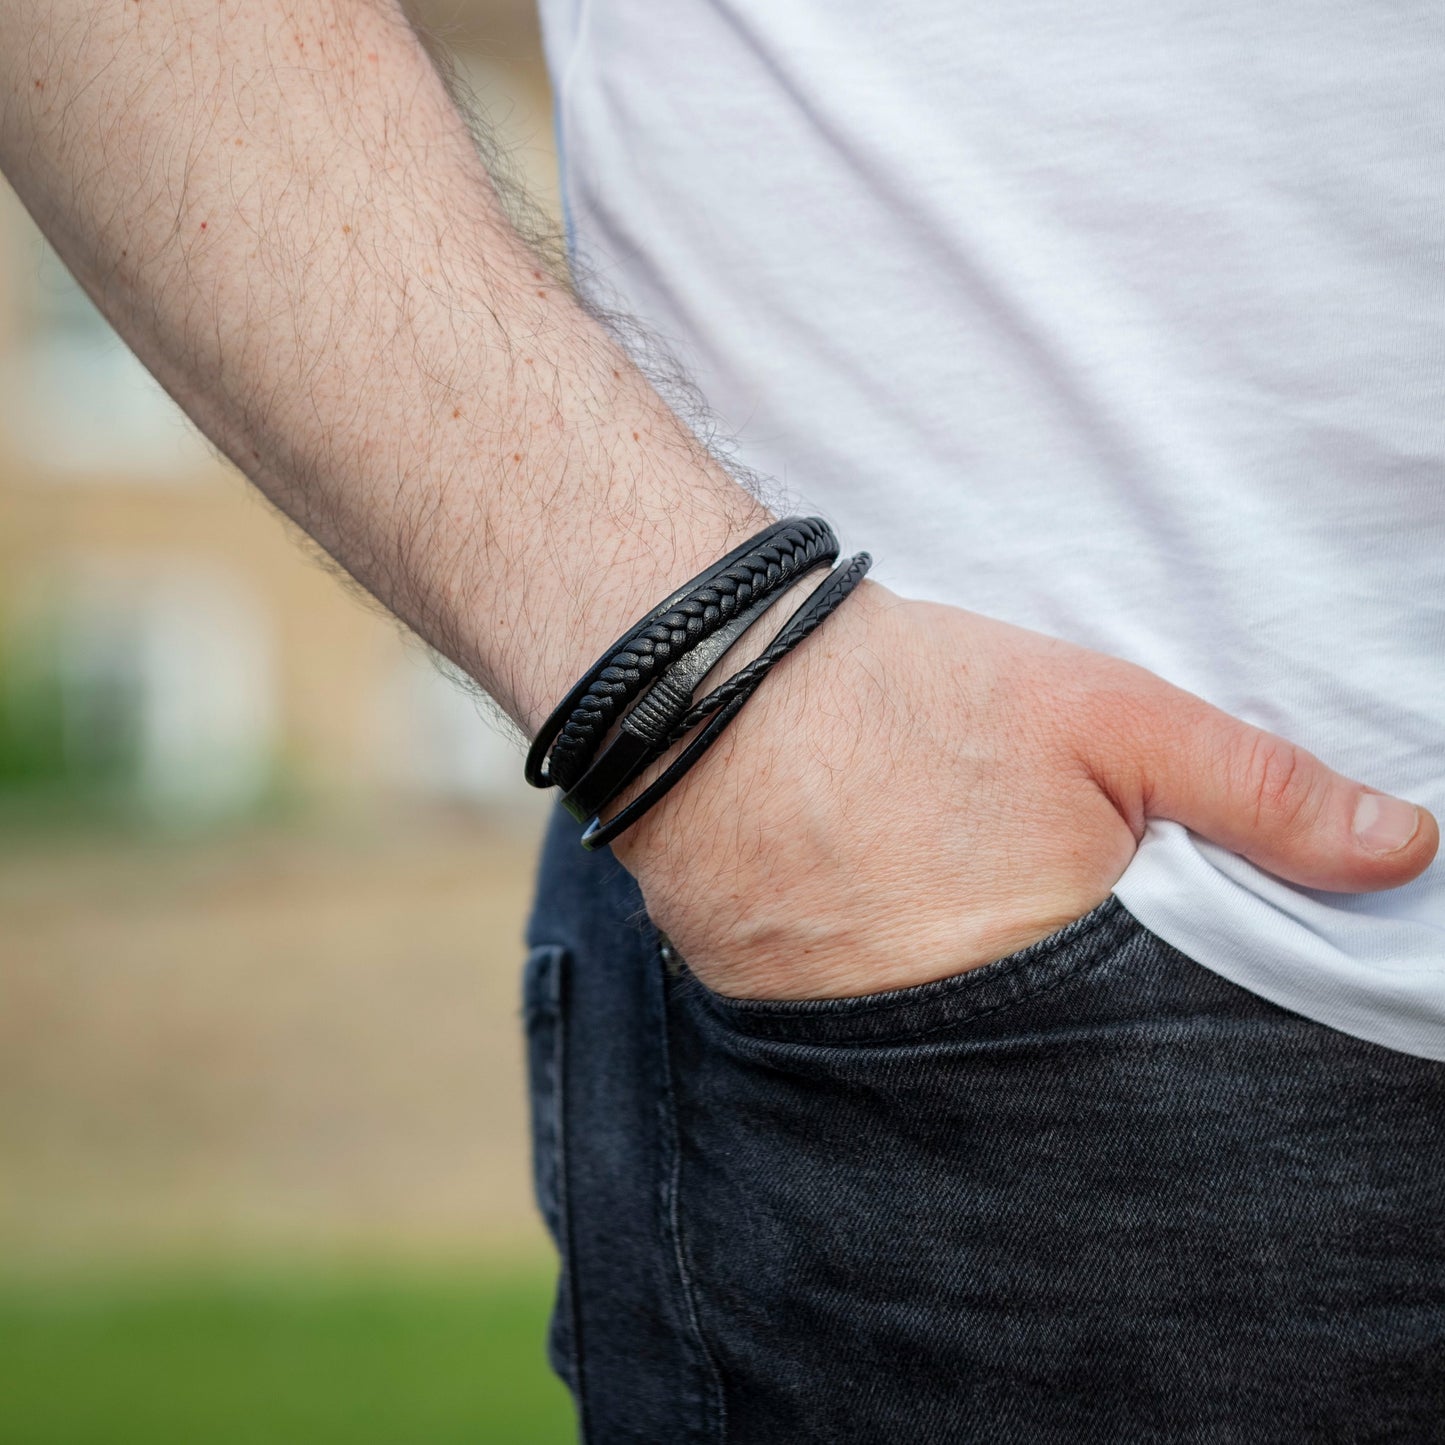 Crysttal Classic Leather Strap Bracelet in black on mans hand view